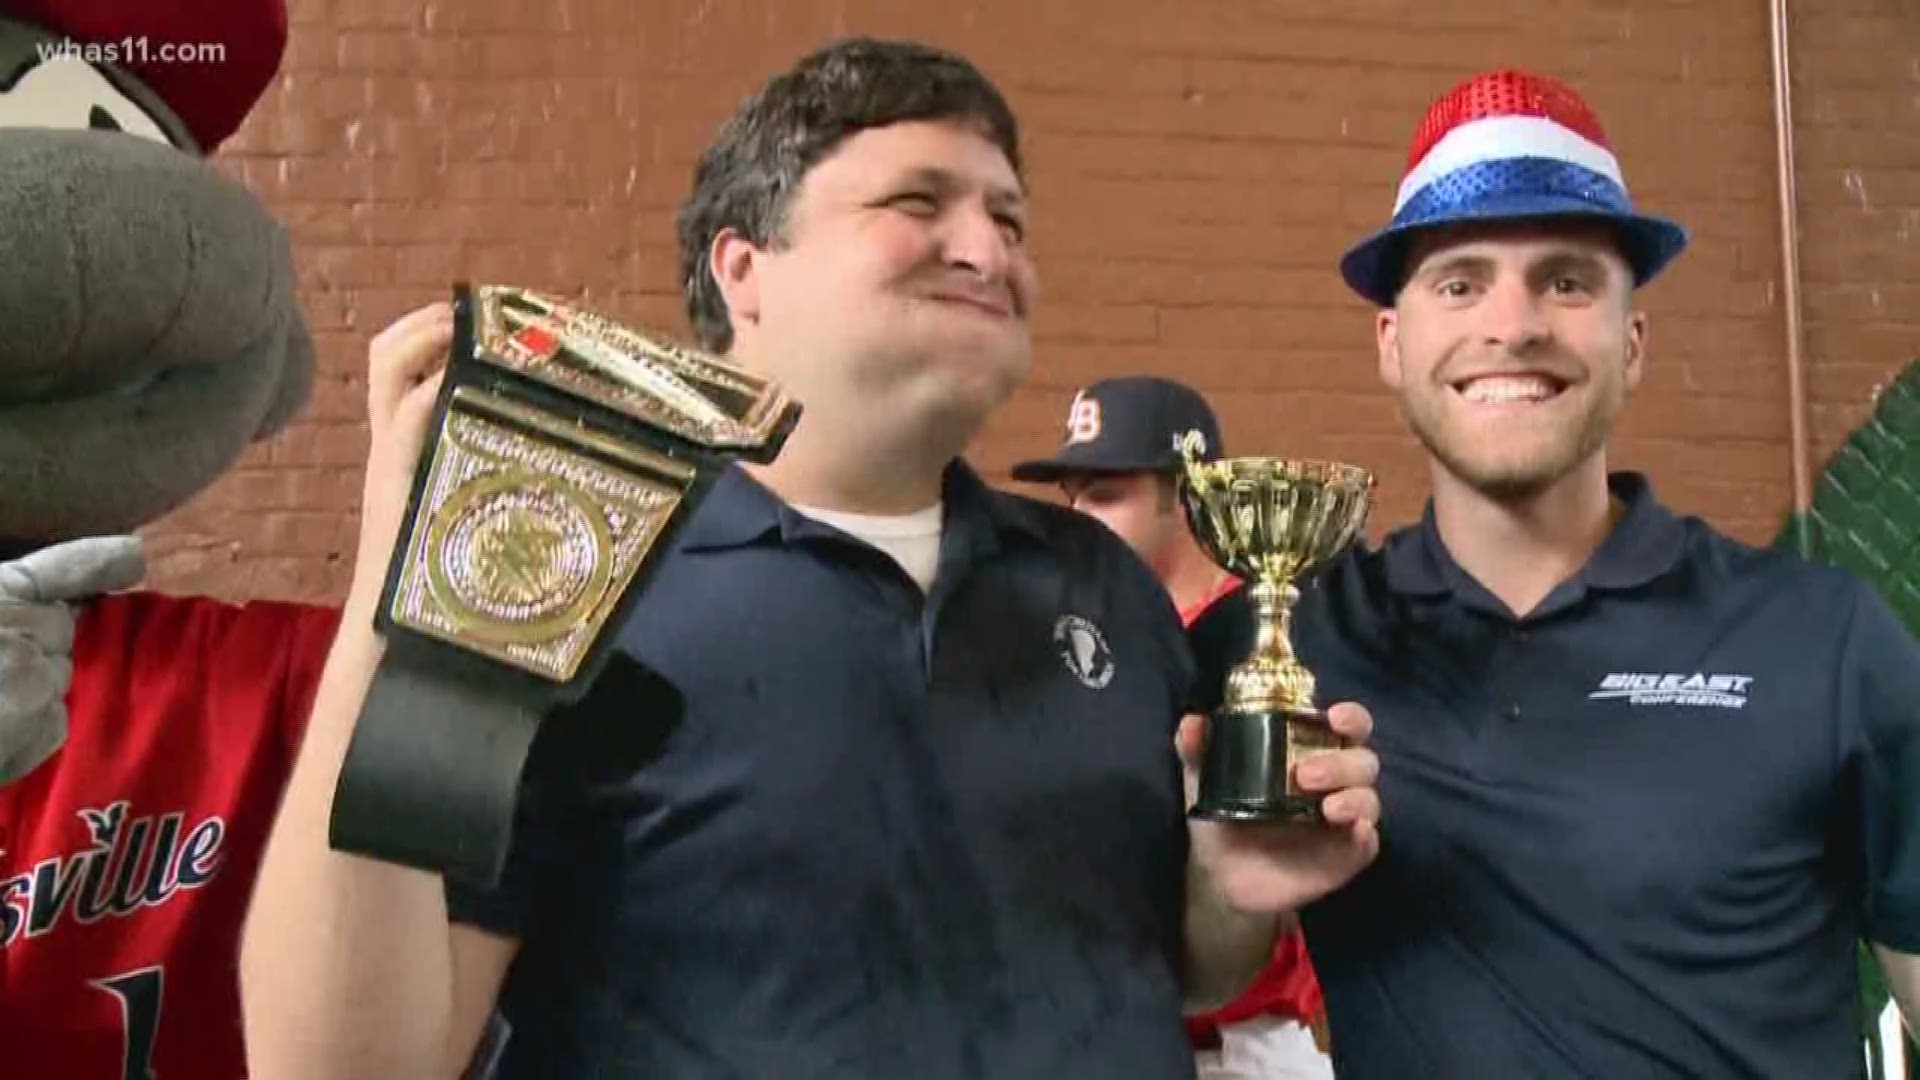 Before Tuesday's game, the Louisville Bats held their first-ever hot dog eating contest. Our own Joseph Federle proved why he's a true champion.